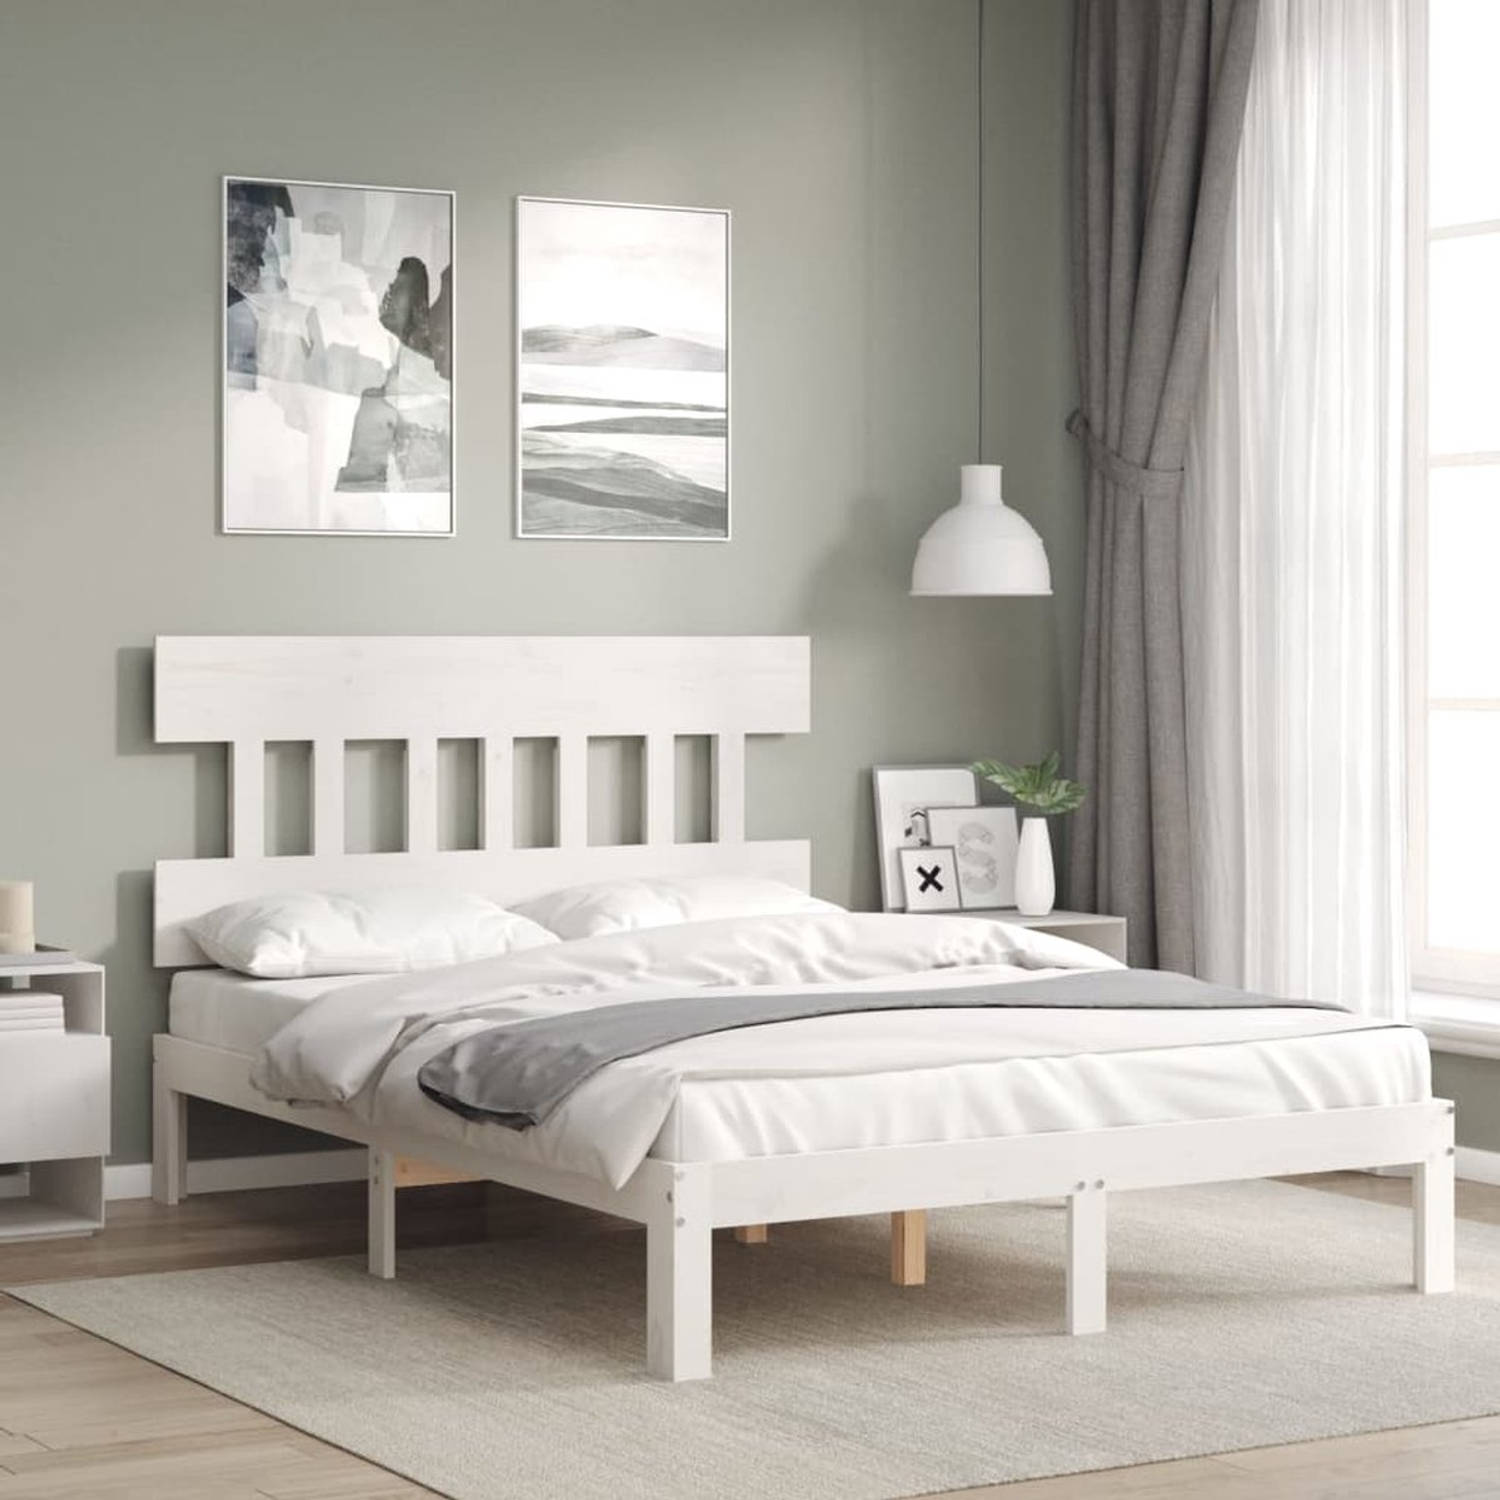 The Living Store Bedframe - Massief grenenhout - 193.5 x 123.5 x 81 cm - Wit